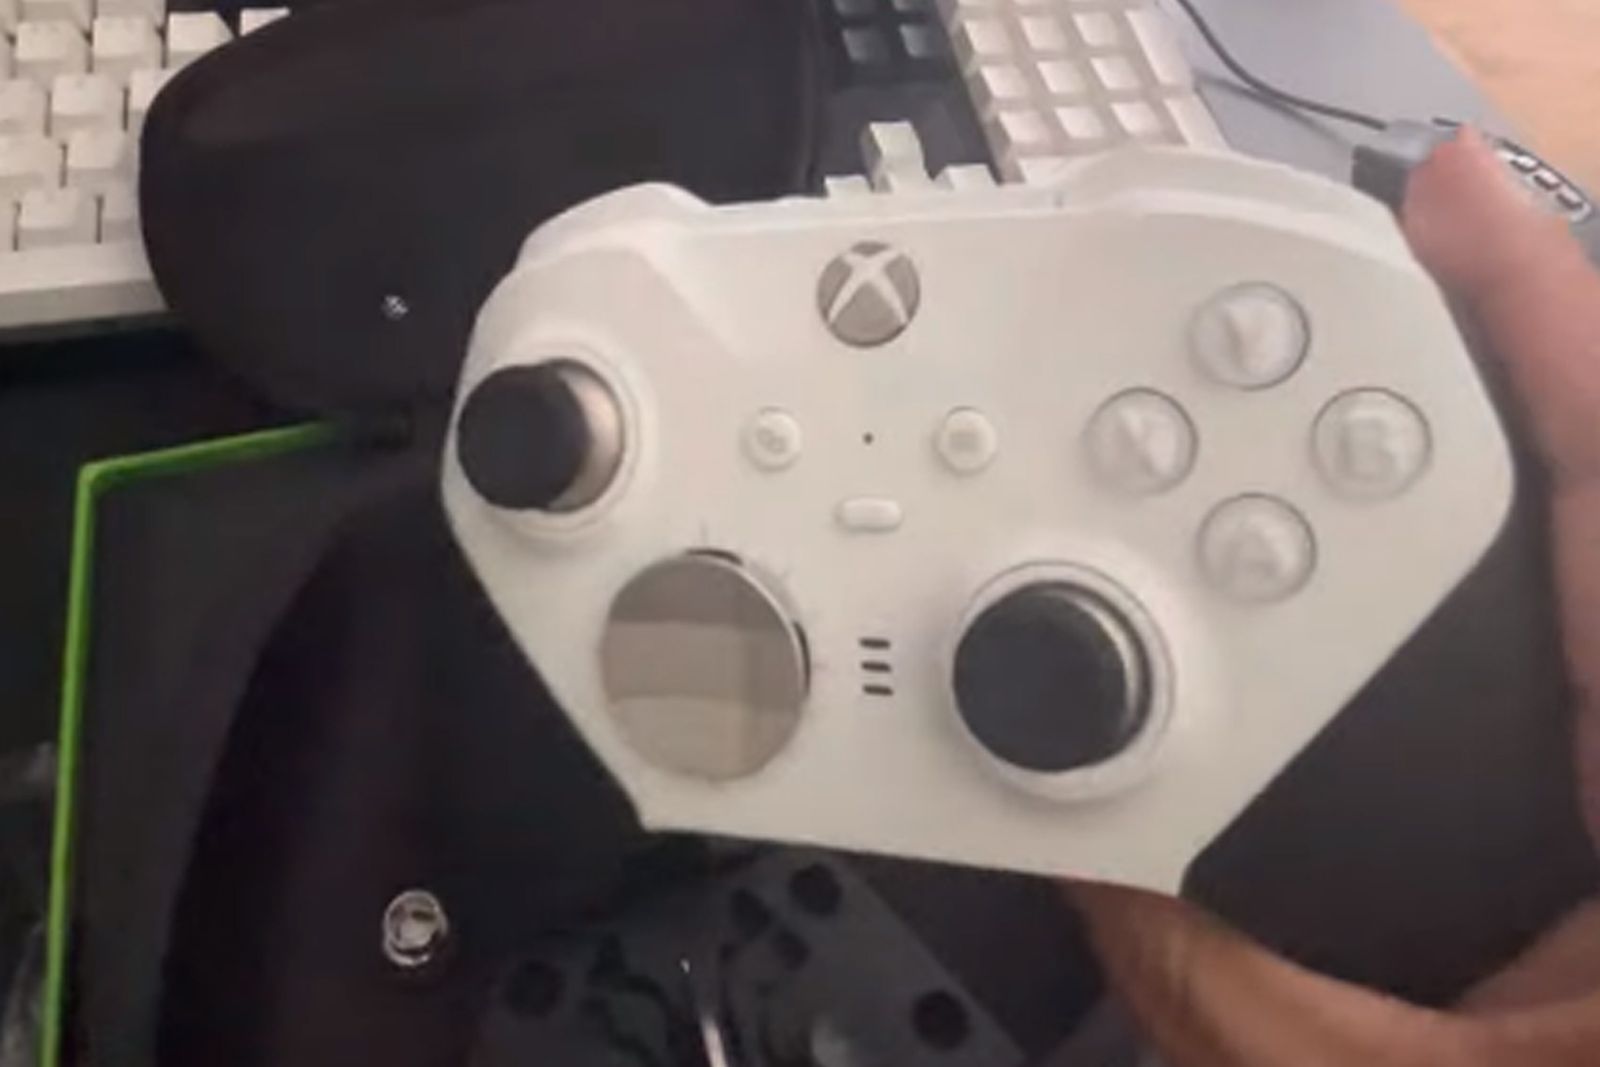 Looks like we're getting a white Xbox Elite 2 controller photo 1